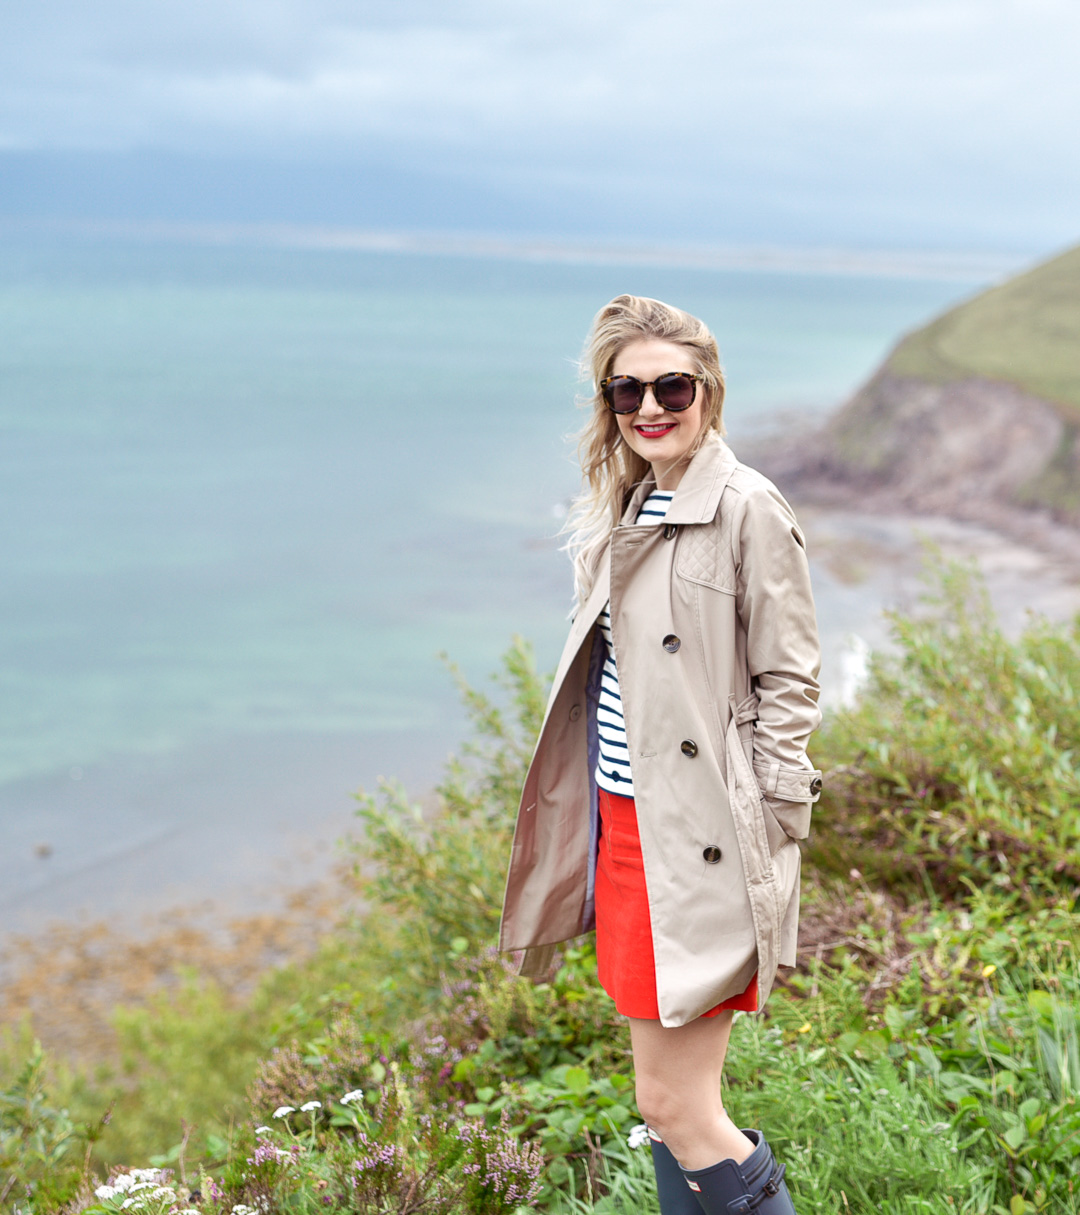 Jenna Colgrove in a red J.Crew corduroy mini skirt in the Ring of Kerry, Ireland. 